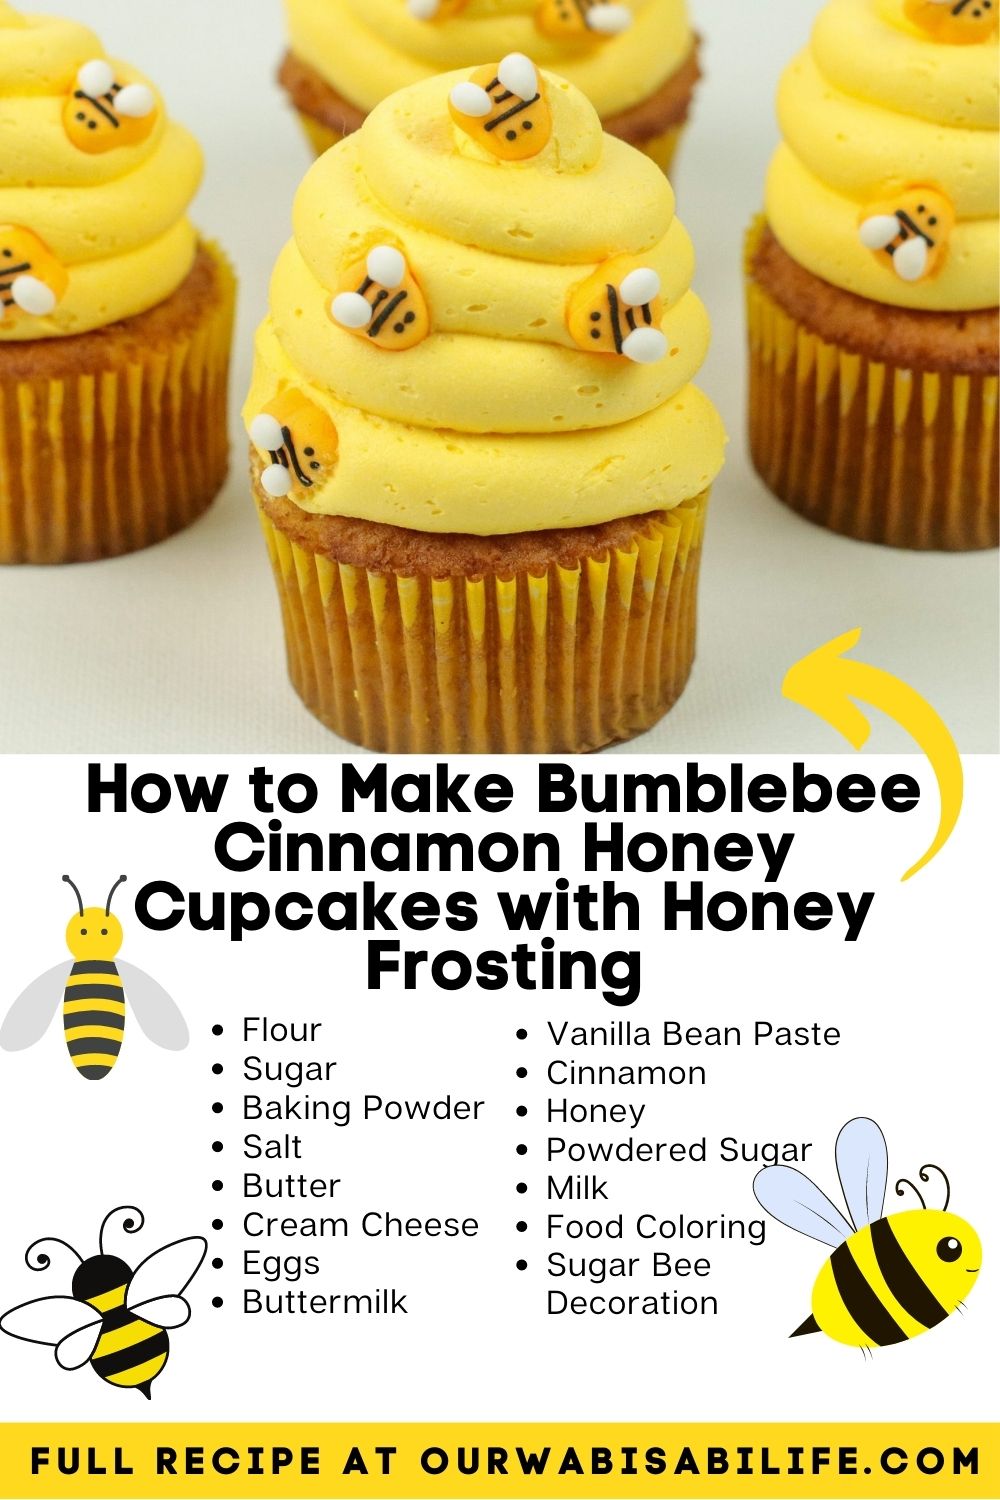 How to Make Bumblebee Cinnamon Honey Cupcakes with Honey Frosting